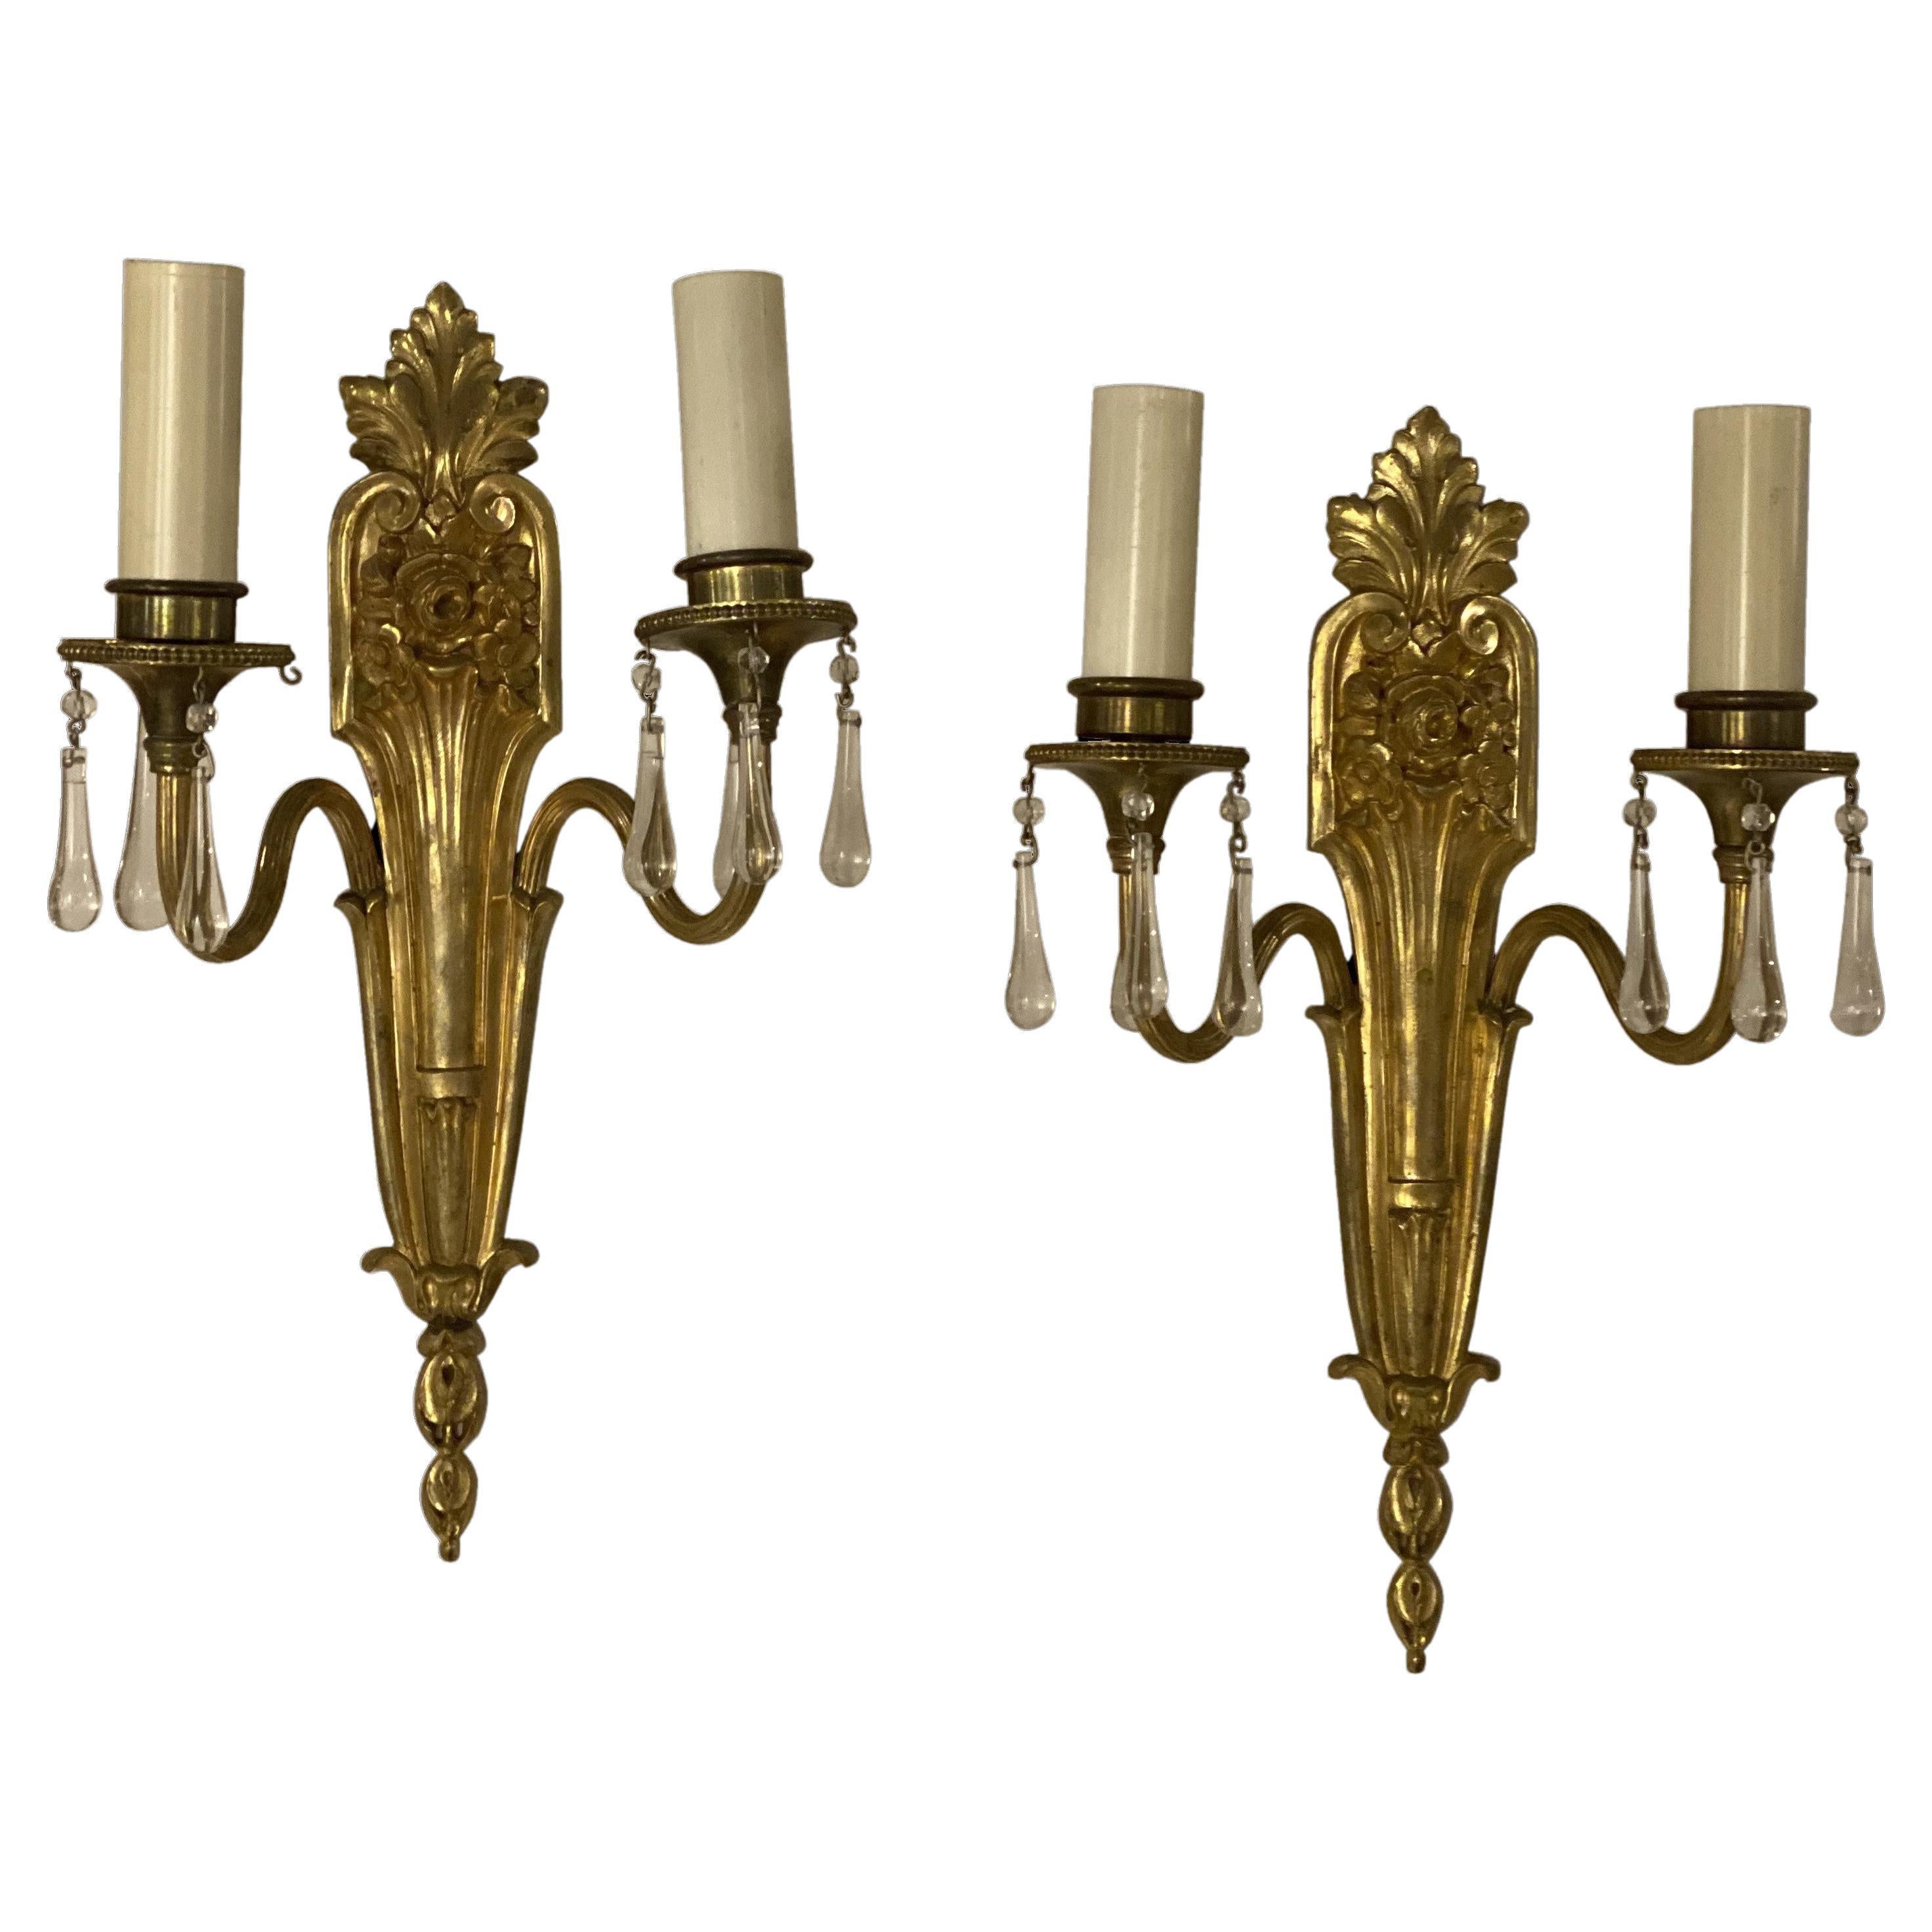 1920's Caldwell Double Lights Sconces with Hanging Crystals For Sale